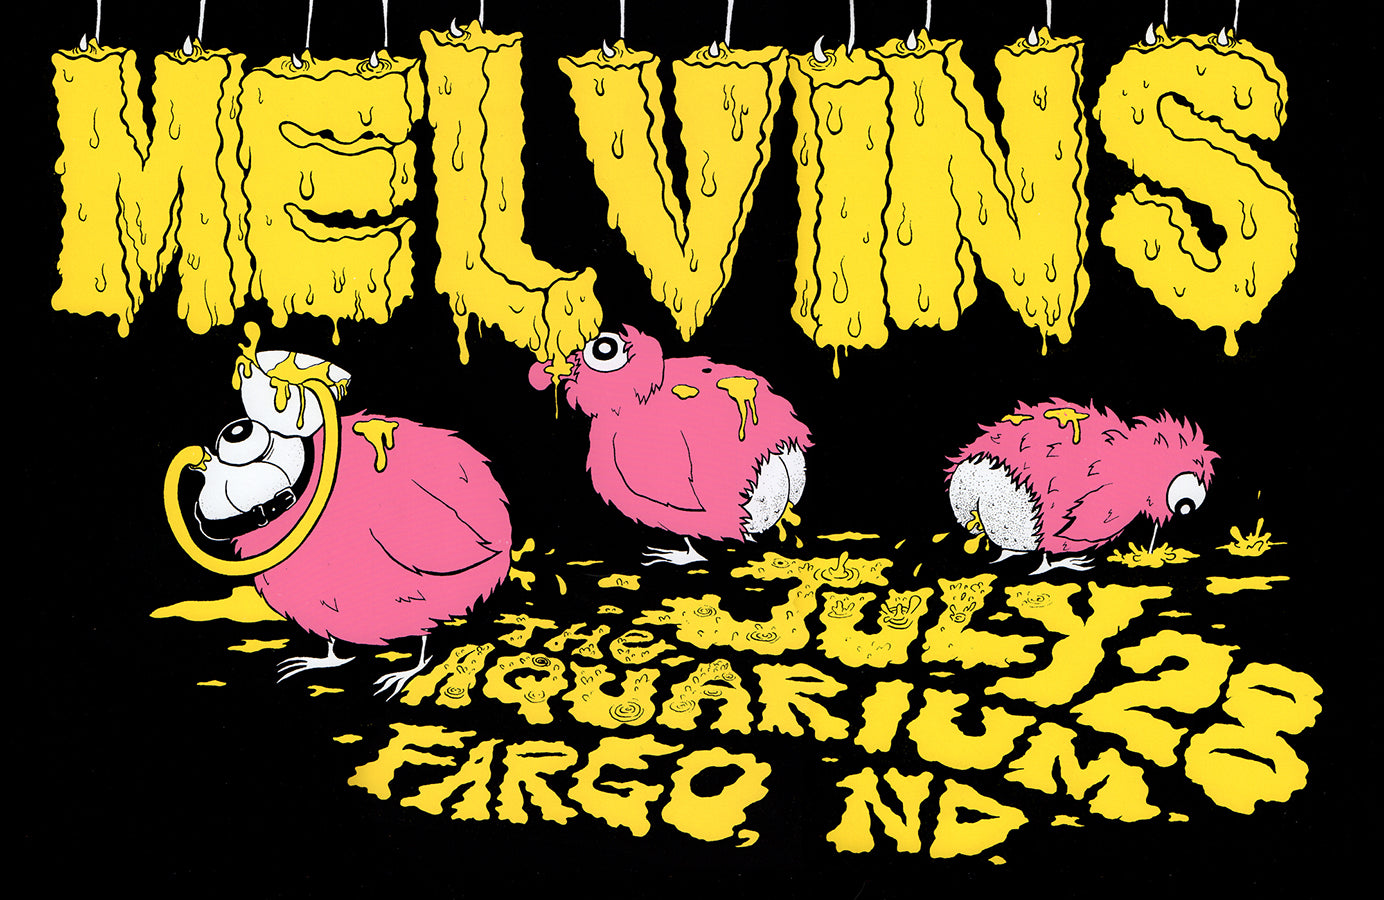 MELVINS - Fargo 2018 by Jason Young